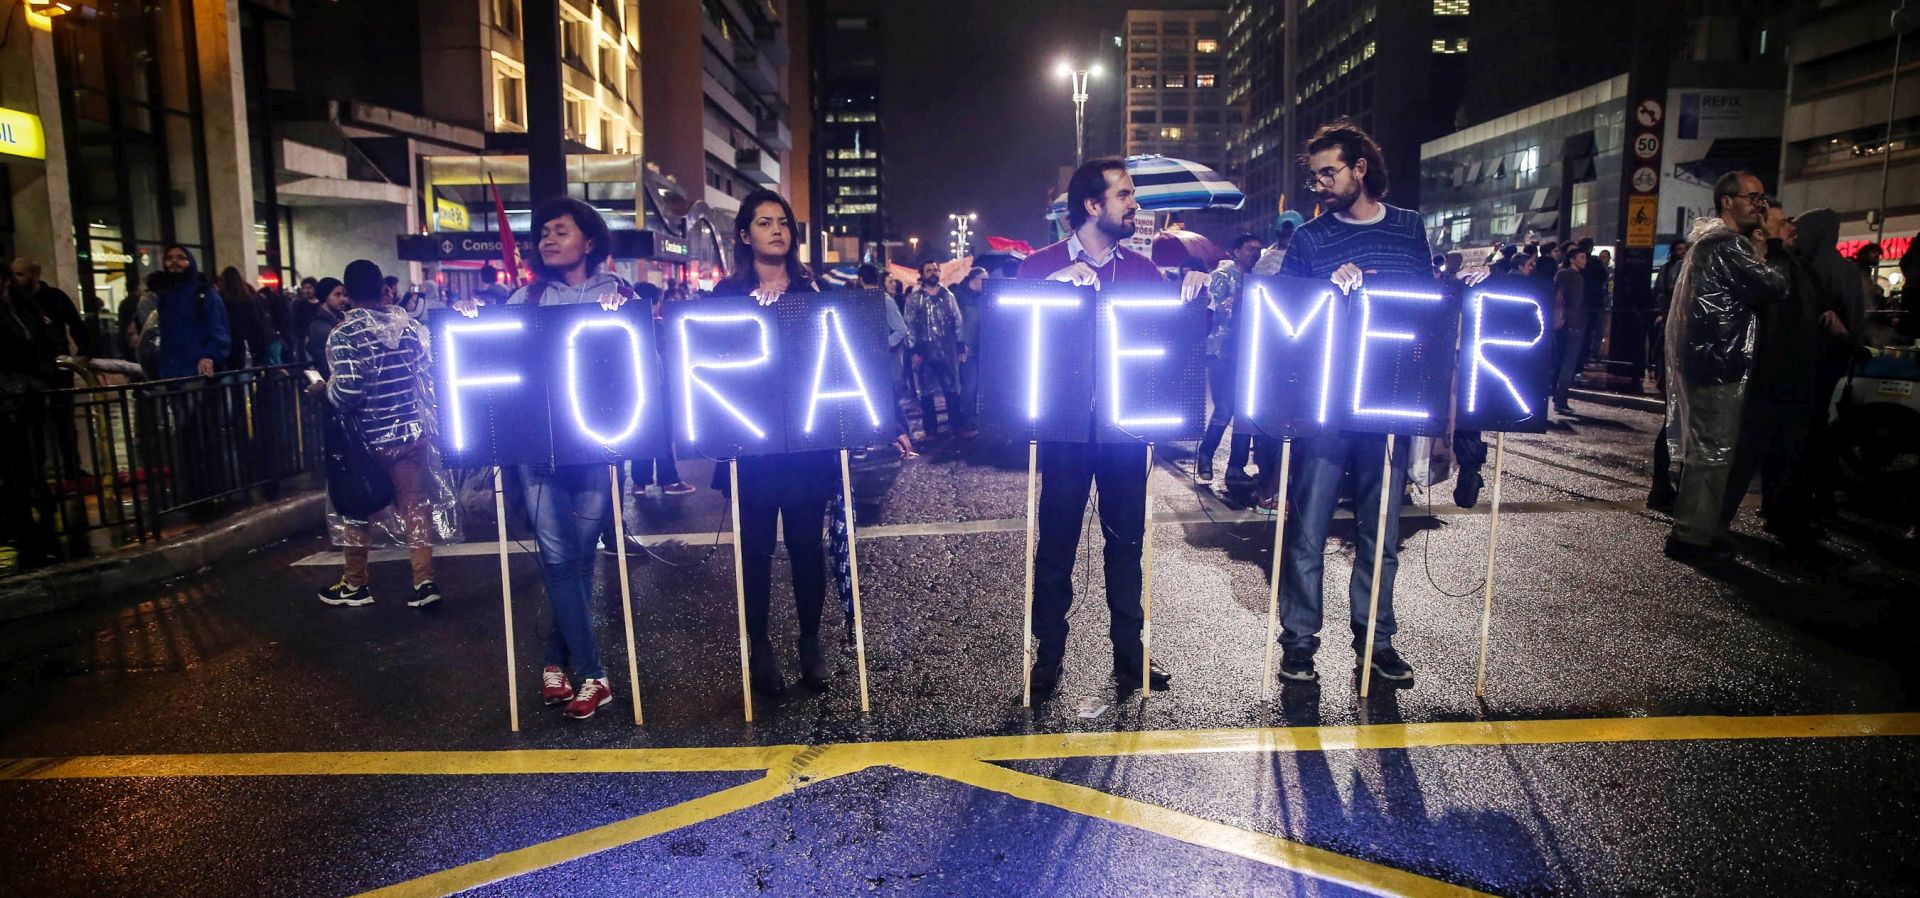 epa05973240 Demonstrators protest against the Government of Brazilian President Michel Temer, at the Paulista Avenue, in Sao Paulo, Brazil, 18 May 2017. Thousands of people took to the streets in the principal cities of Brazil to protest against the government of Michel Temer, over allegations he is involved in a corruption scandal and attempts to obstruct justice. The sign held by the protestors reads: 'Out Temer.'  EPA/FERNANDO BIZERRA JR.